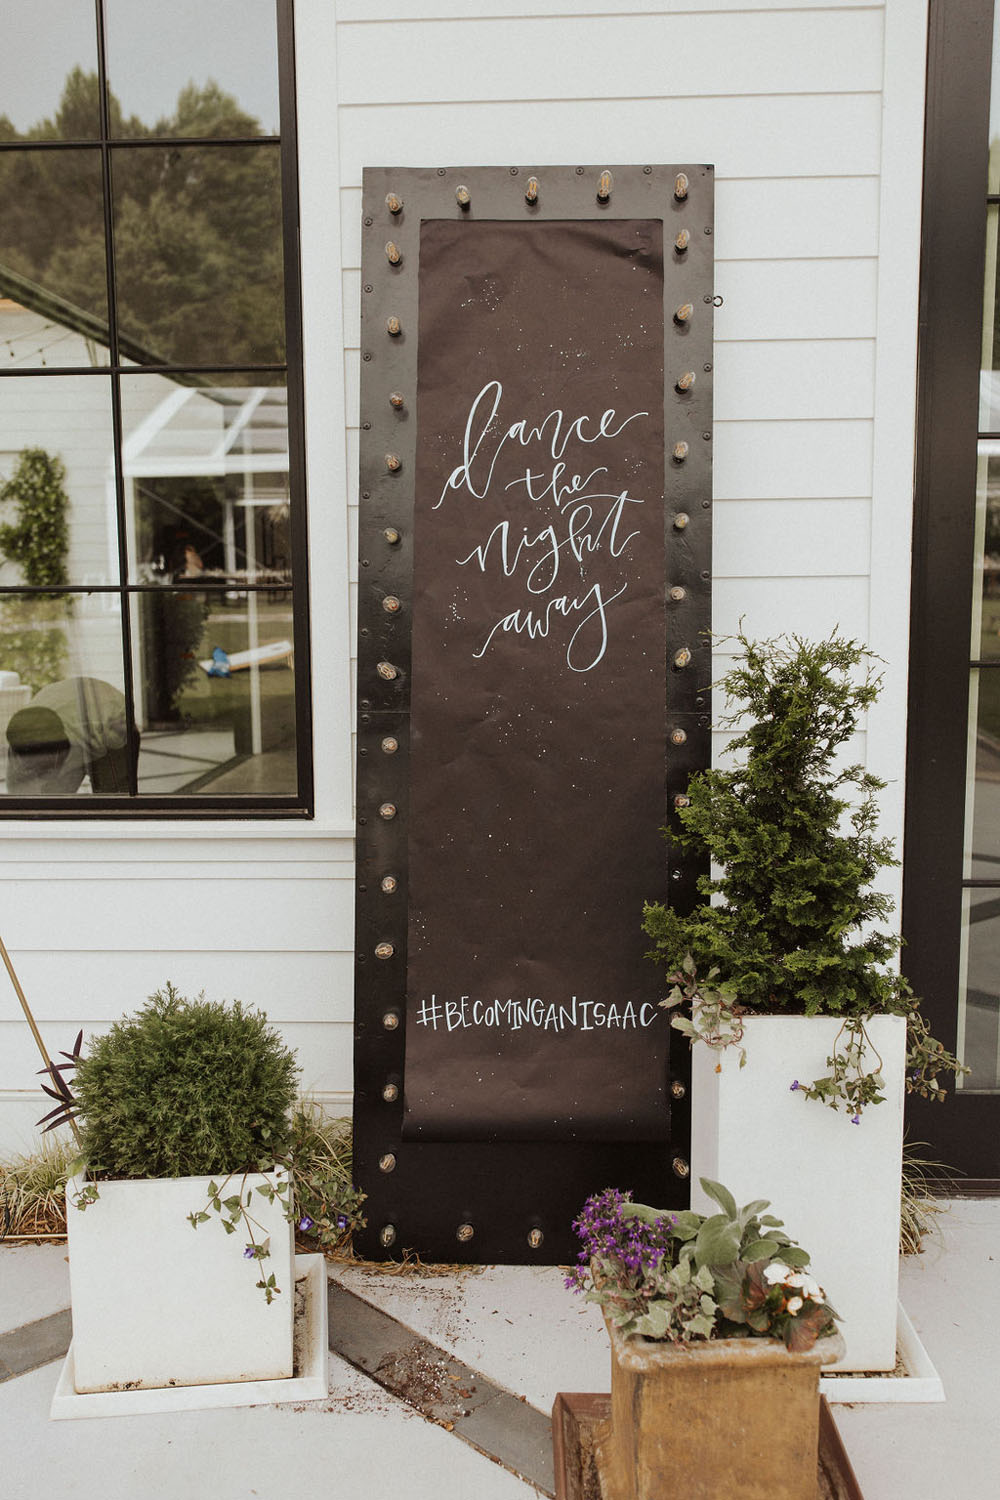 Intimate wedding at a home in North Carolina with a neutral color palette